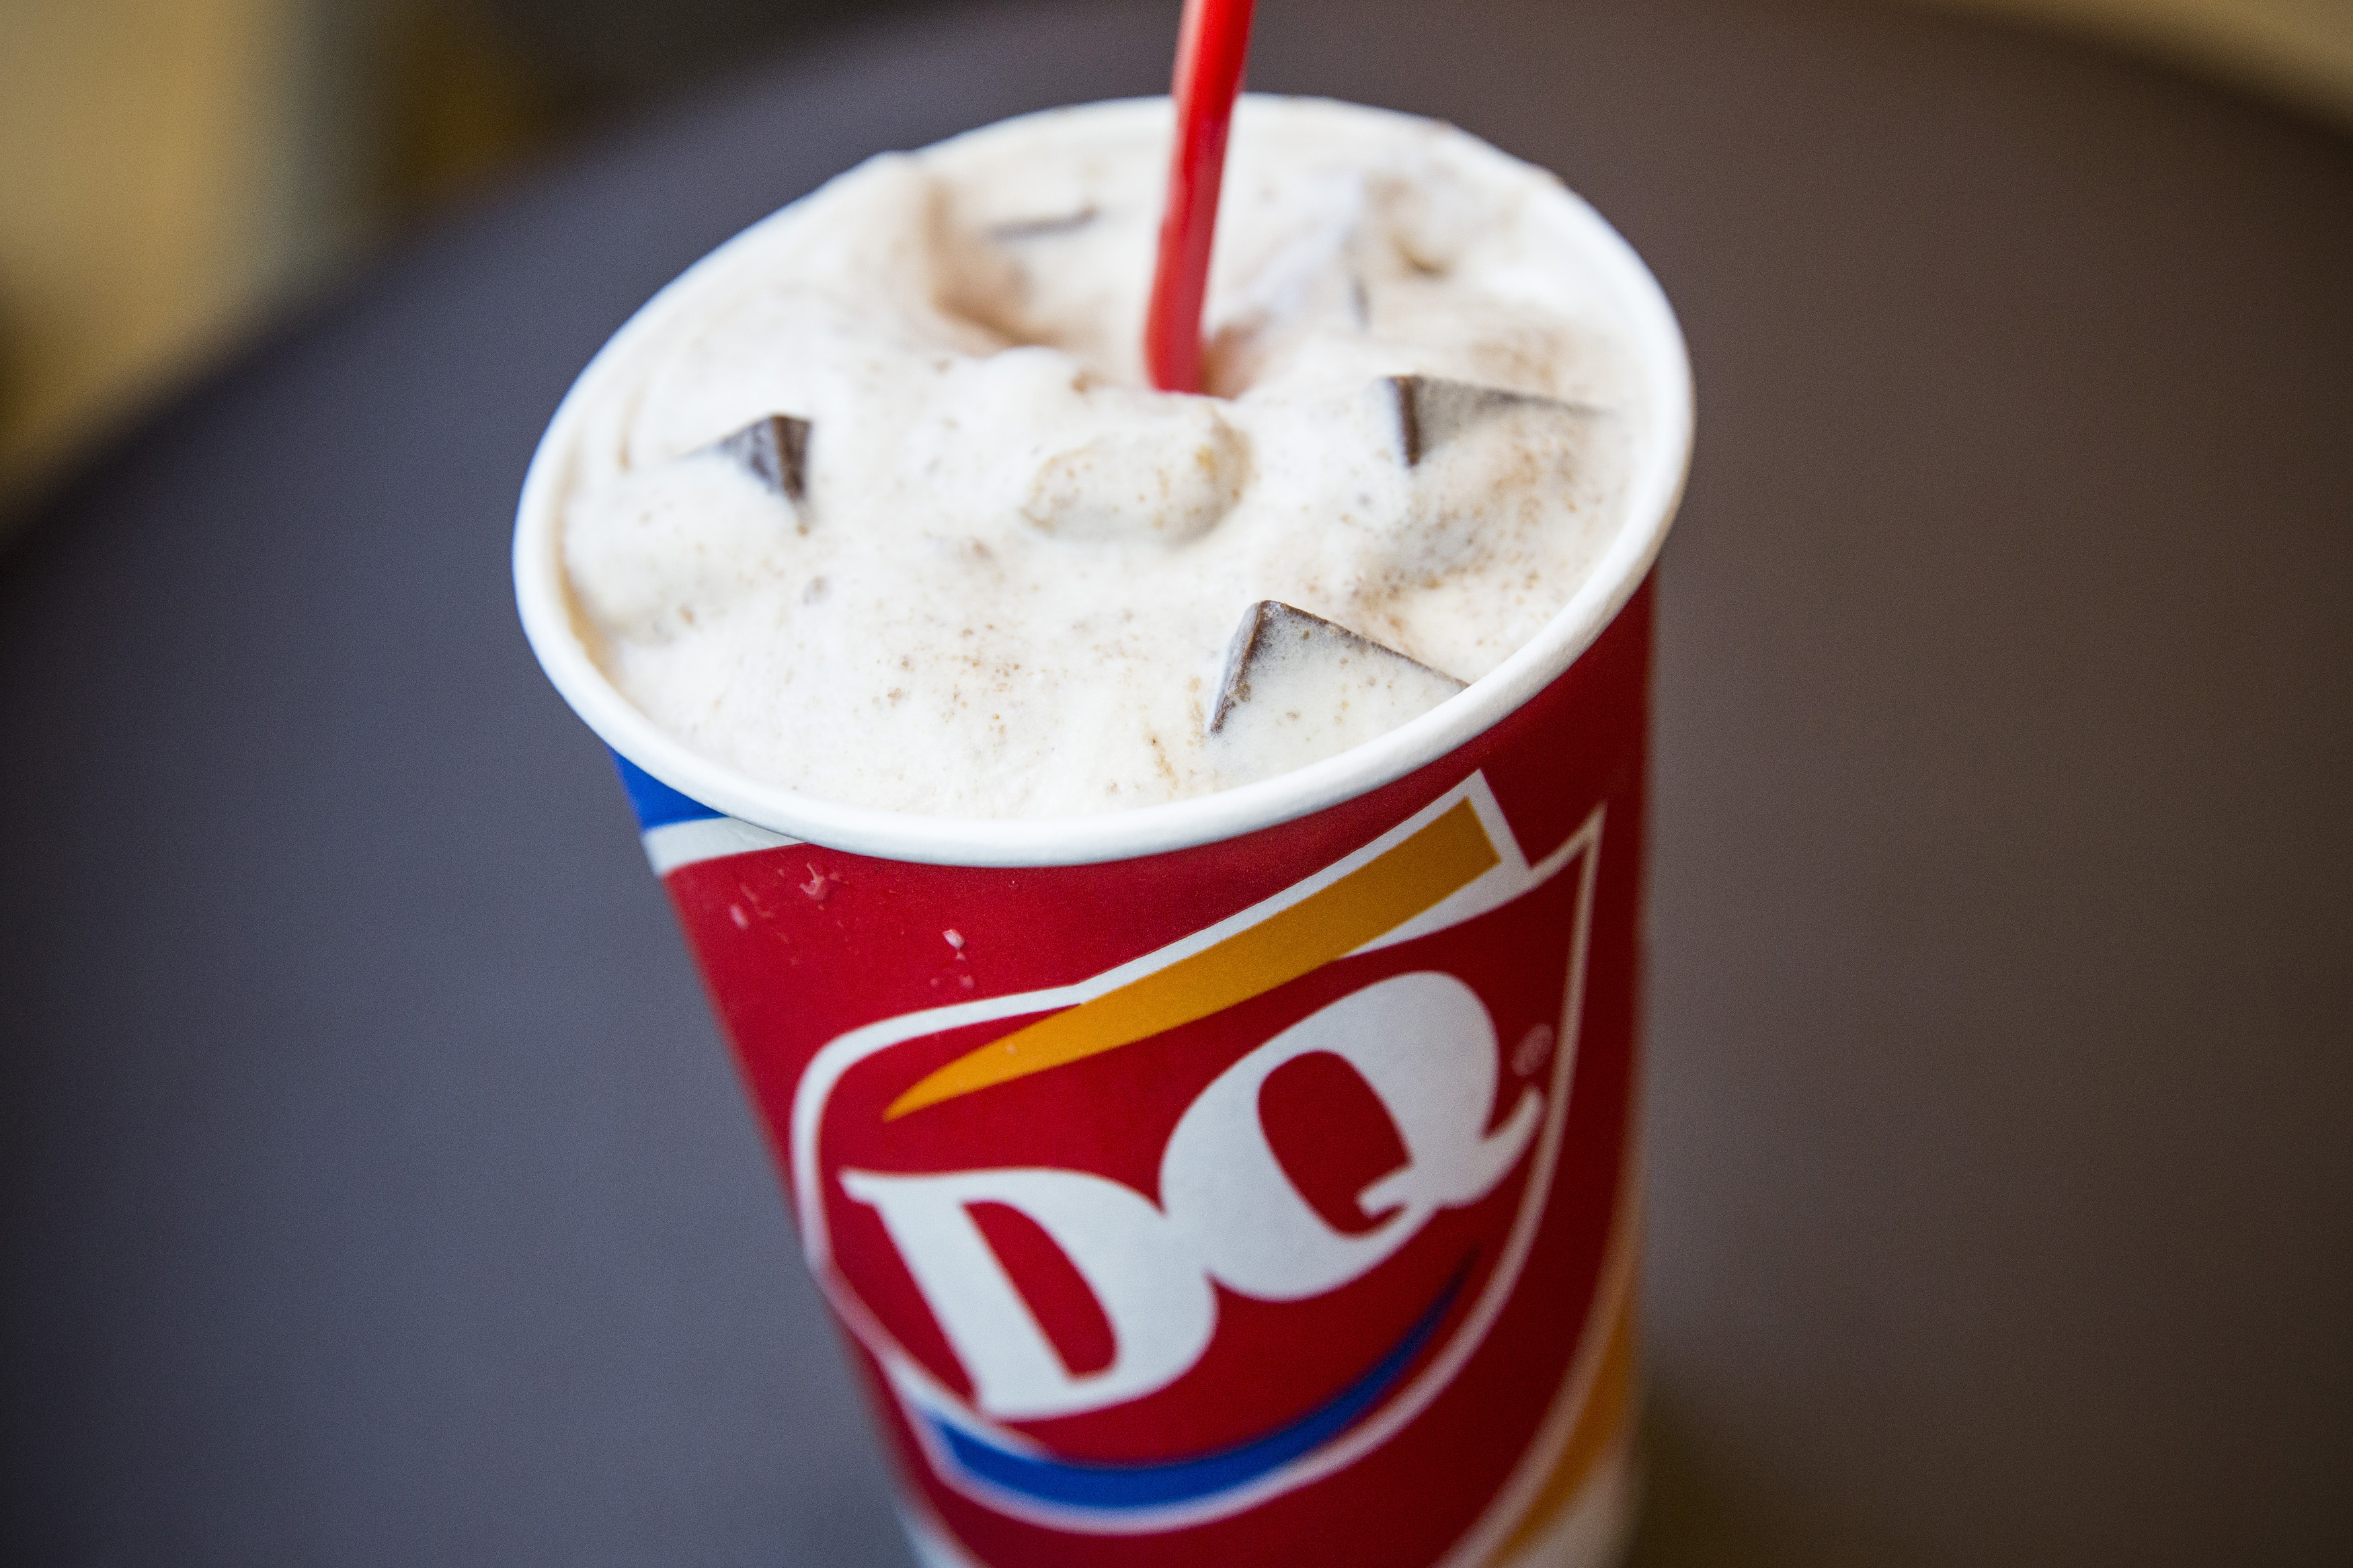 Dairy Queen offering buy one Blizzard, get one for 99 cents WISHTV